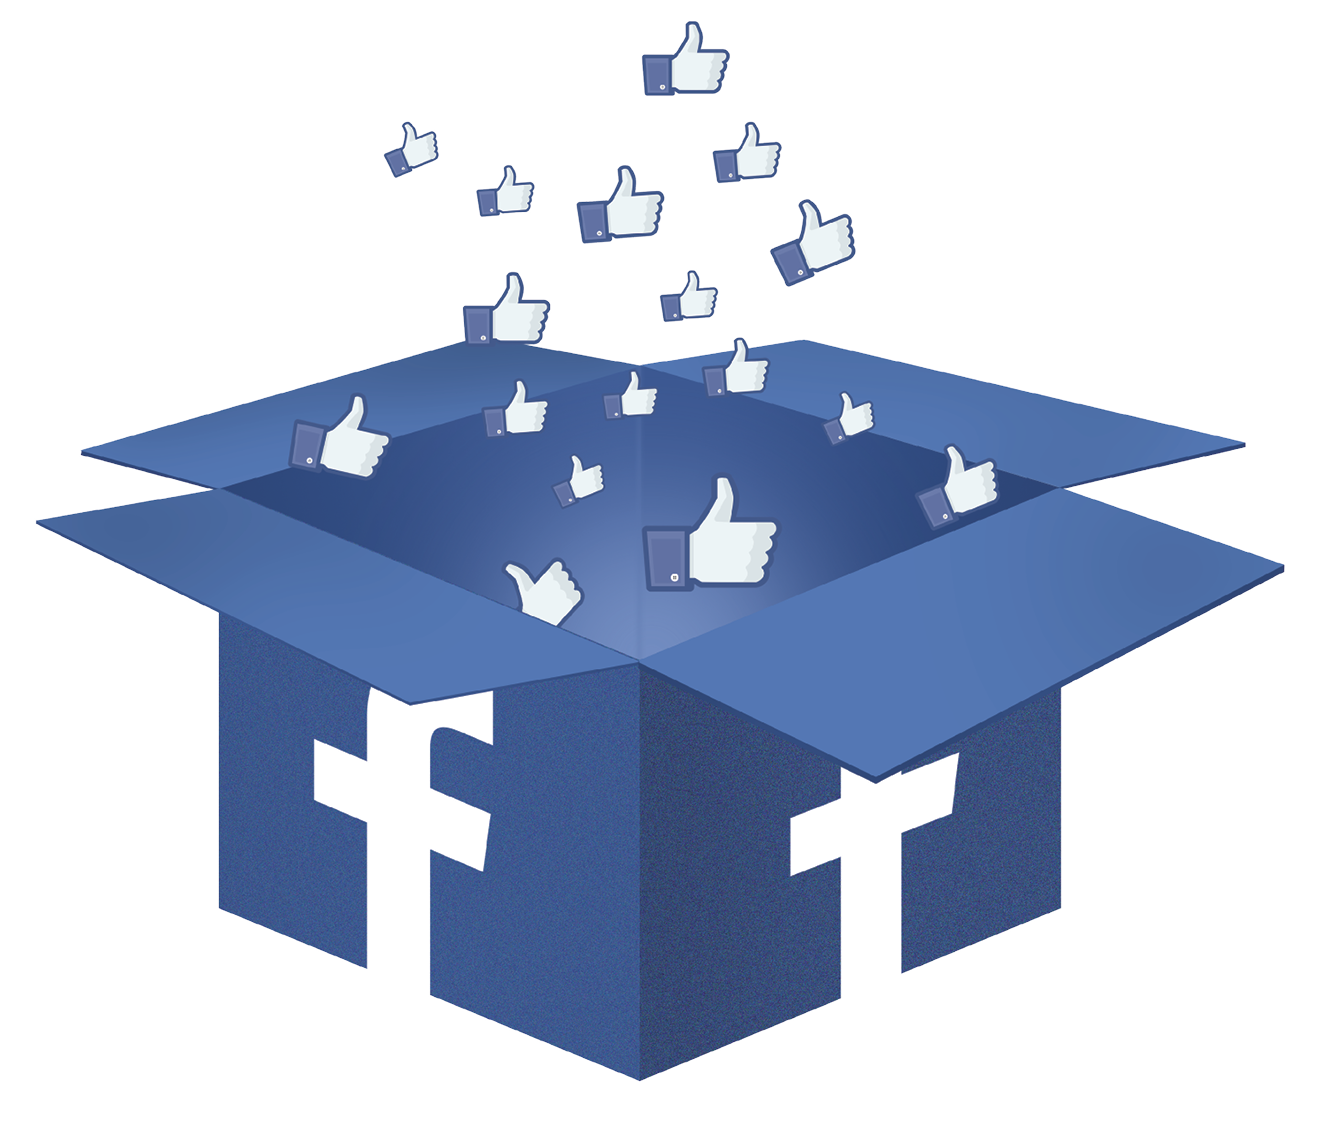 lucha Adviento Buena voluntad Leads from Facebook - How to Flood Your Business - Concrete Decor